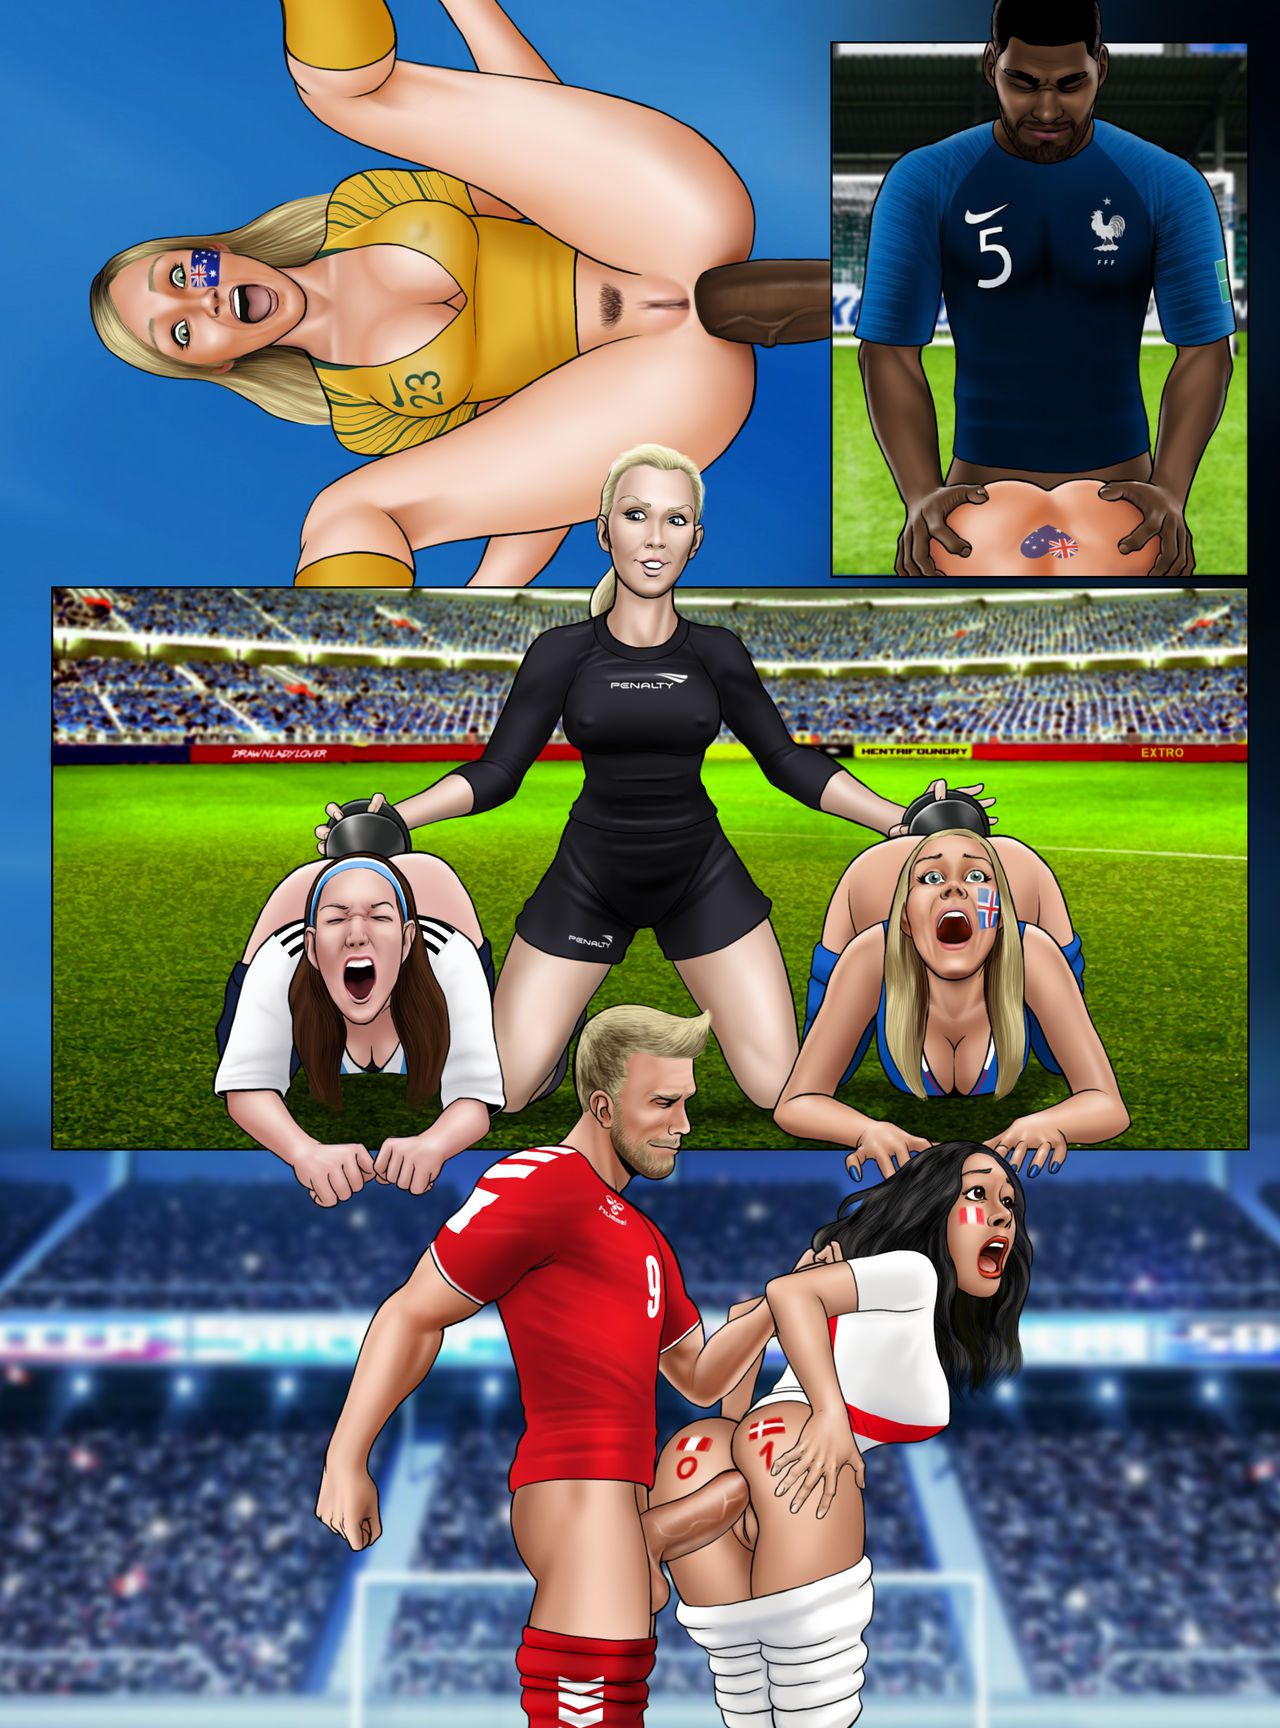 [Extro] FIFA World Cup Russia 2018 - Soccer Hentai - Women's World Cup France 2019 (Ongoing) [Korean] 18